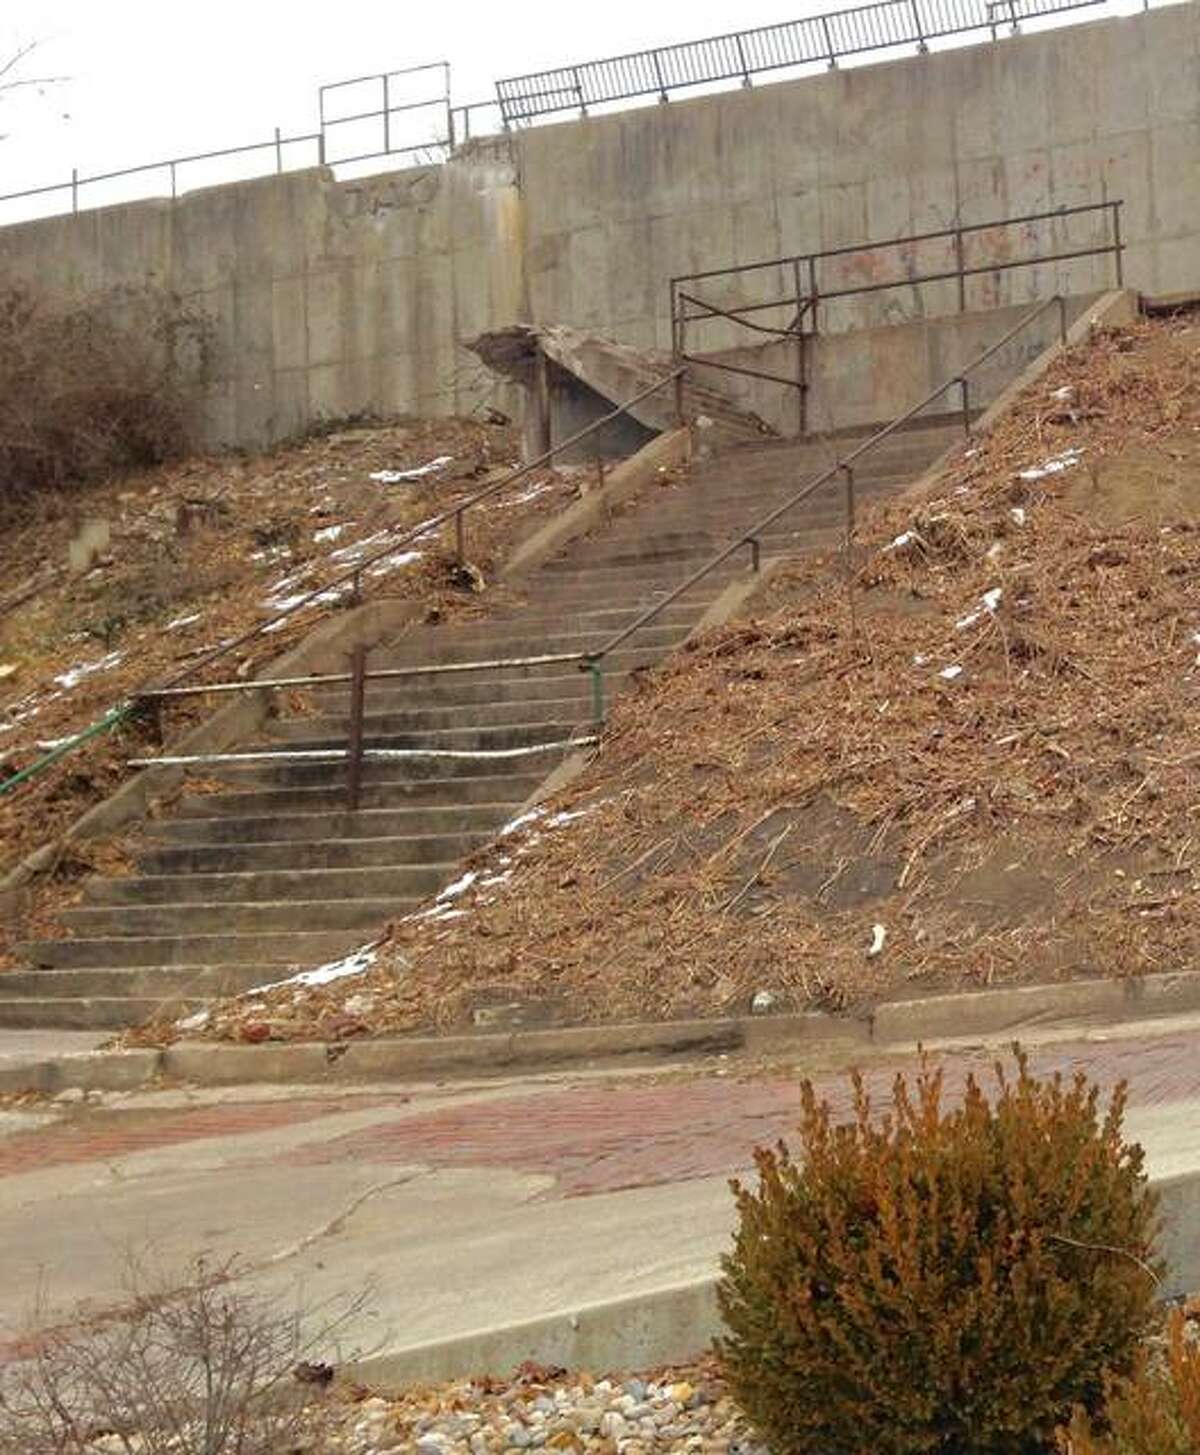 Alton Public Works and Park departments’ workers recently cleared a hill of some plant growth Downtown by Fourth Street, below Market Street, to determine what repairs are needed to a graffiti-defaced wall, staircase that ends mid-air and a sidewalk that runs from the steps to the south.